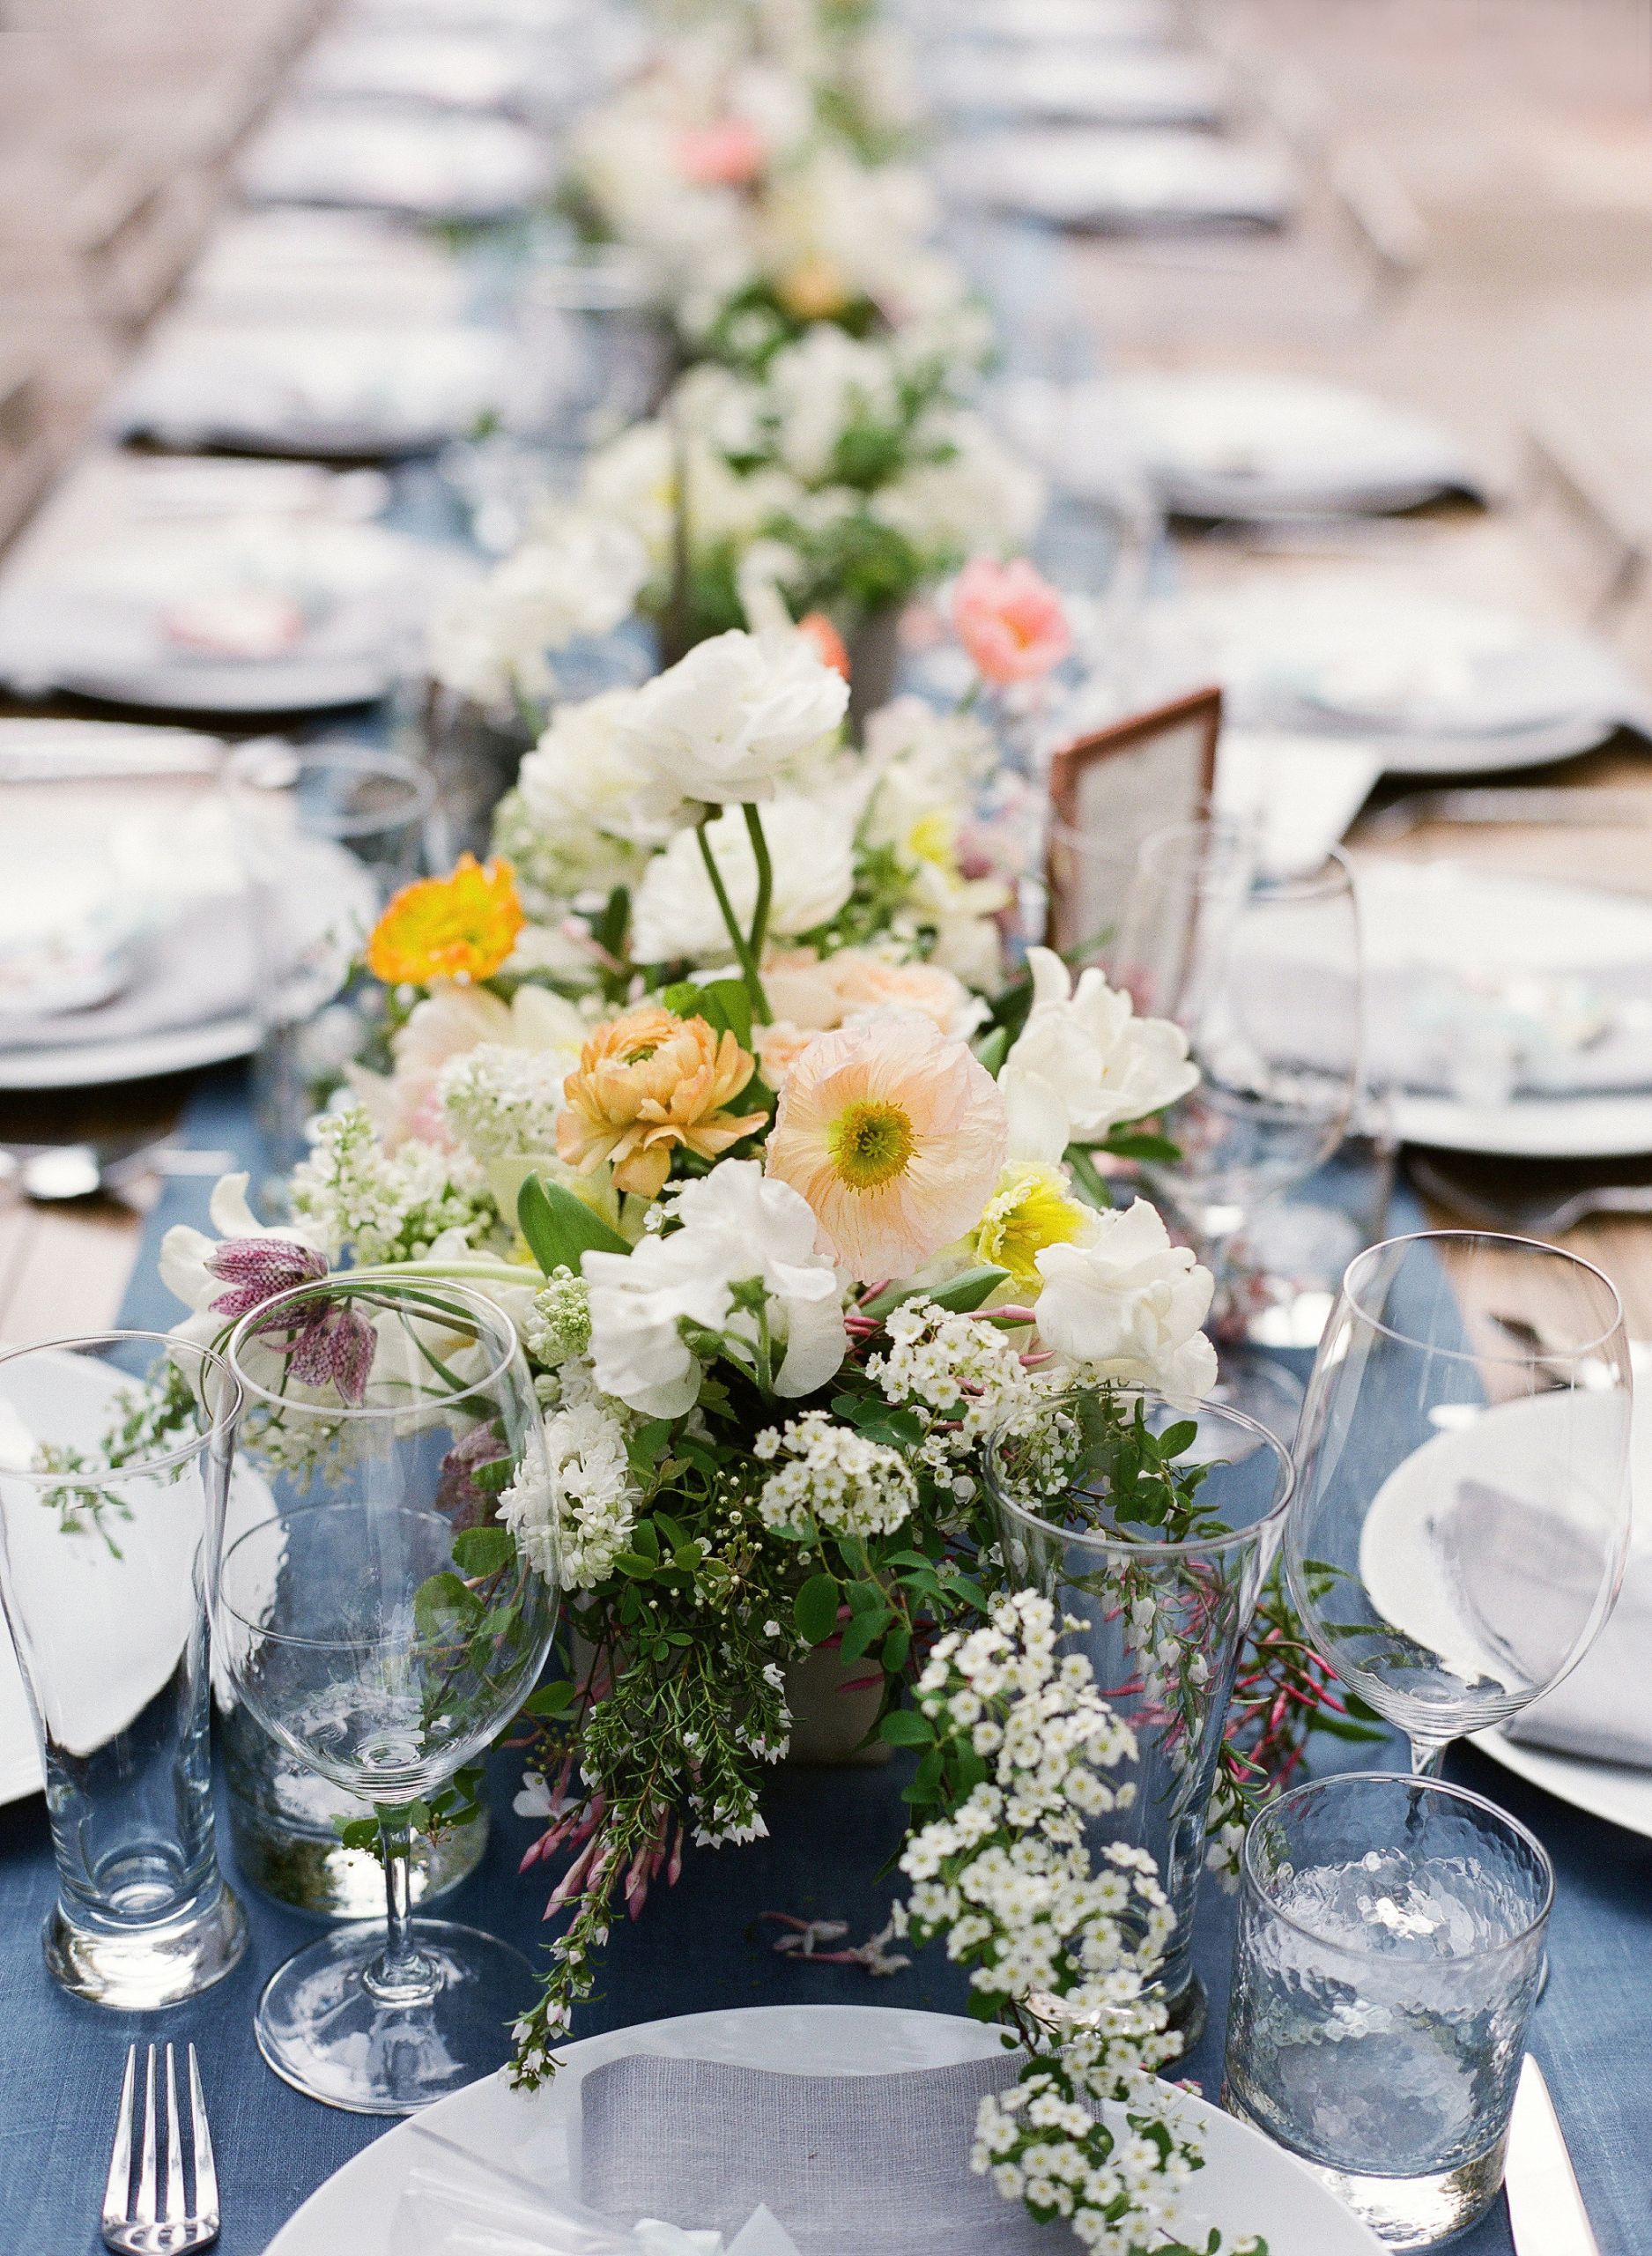 Wedding Centerpieces Flowers
 40 of Our Favorite Floral Wedding Centerpieces